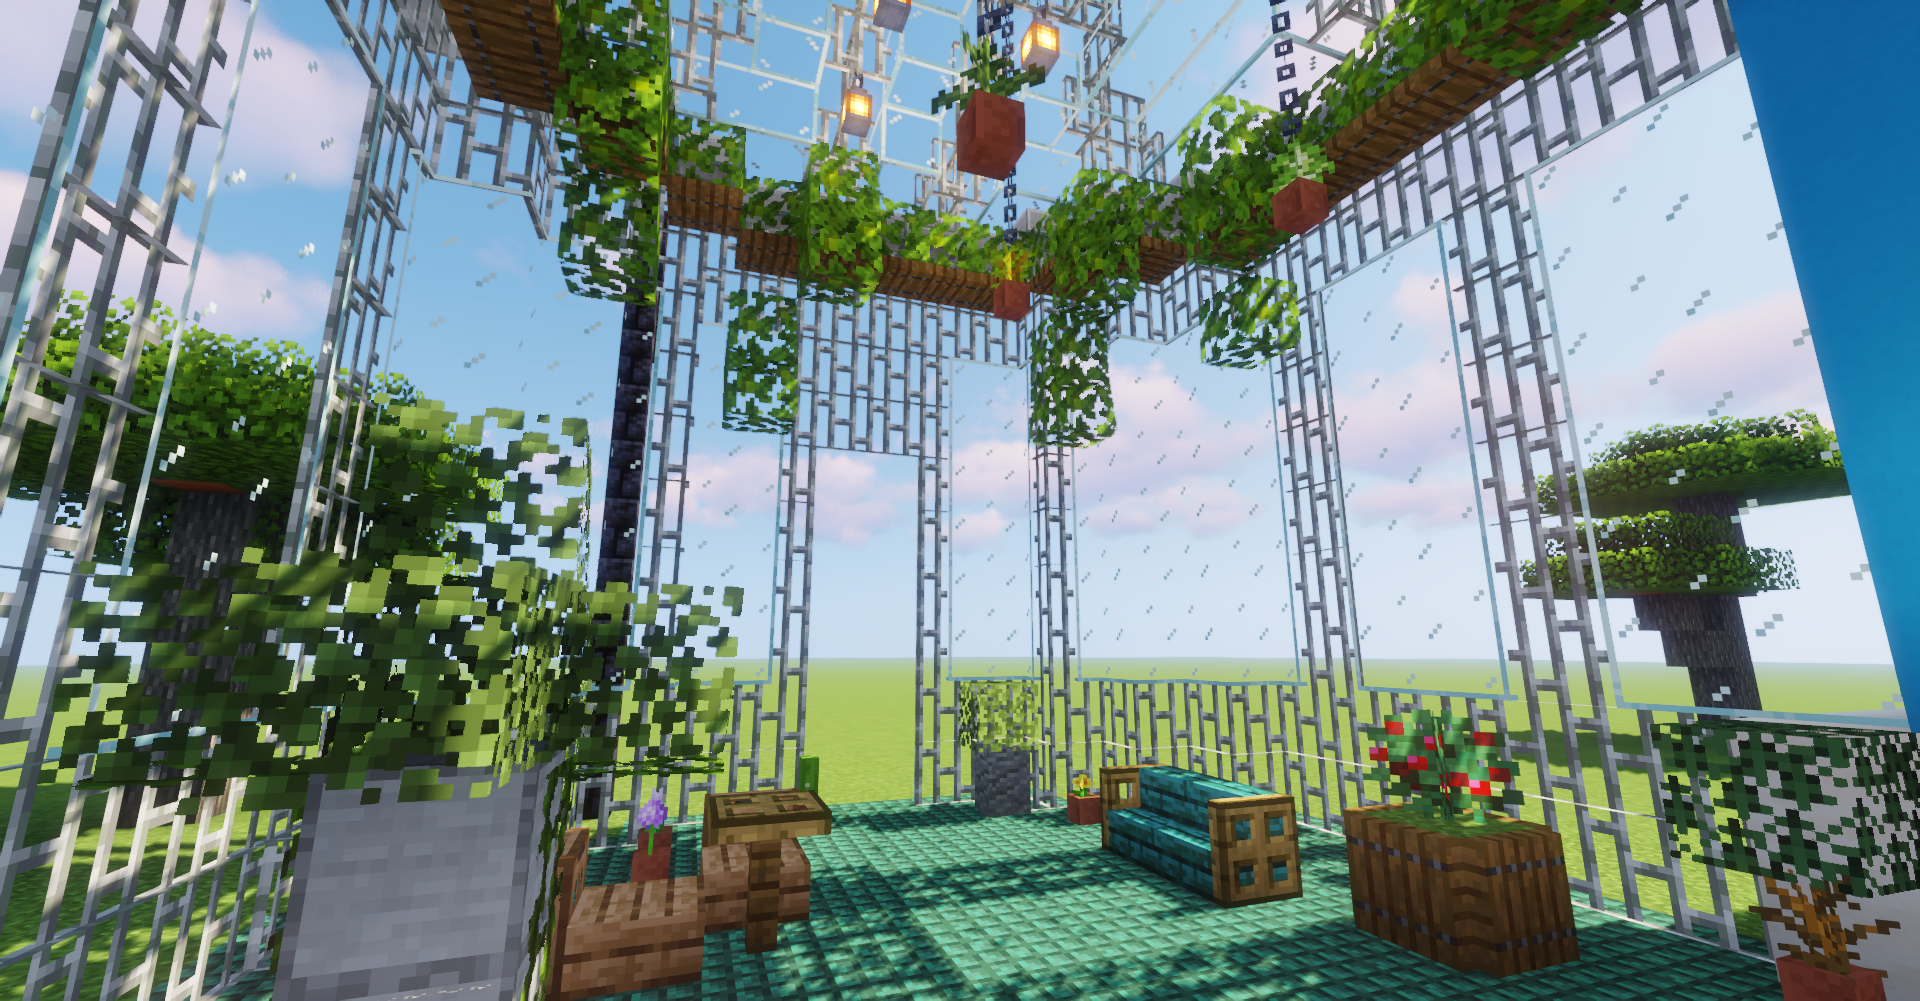 KINAC_Minecraft_Greenhouse2.png